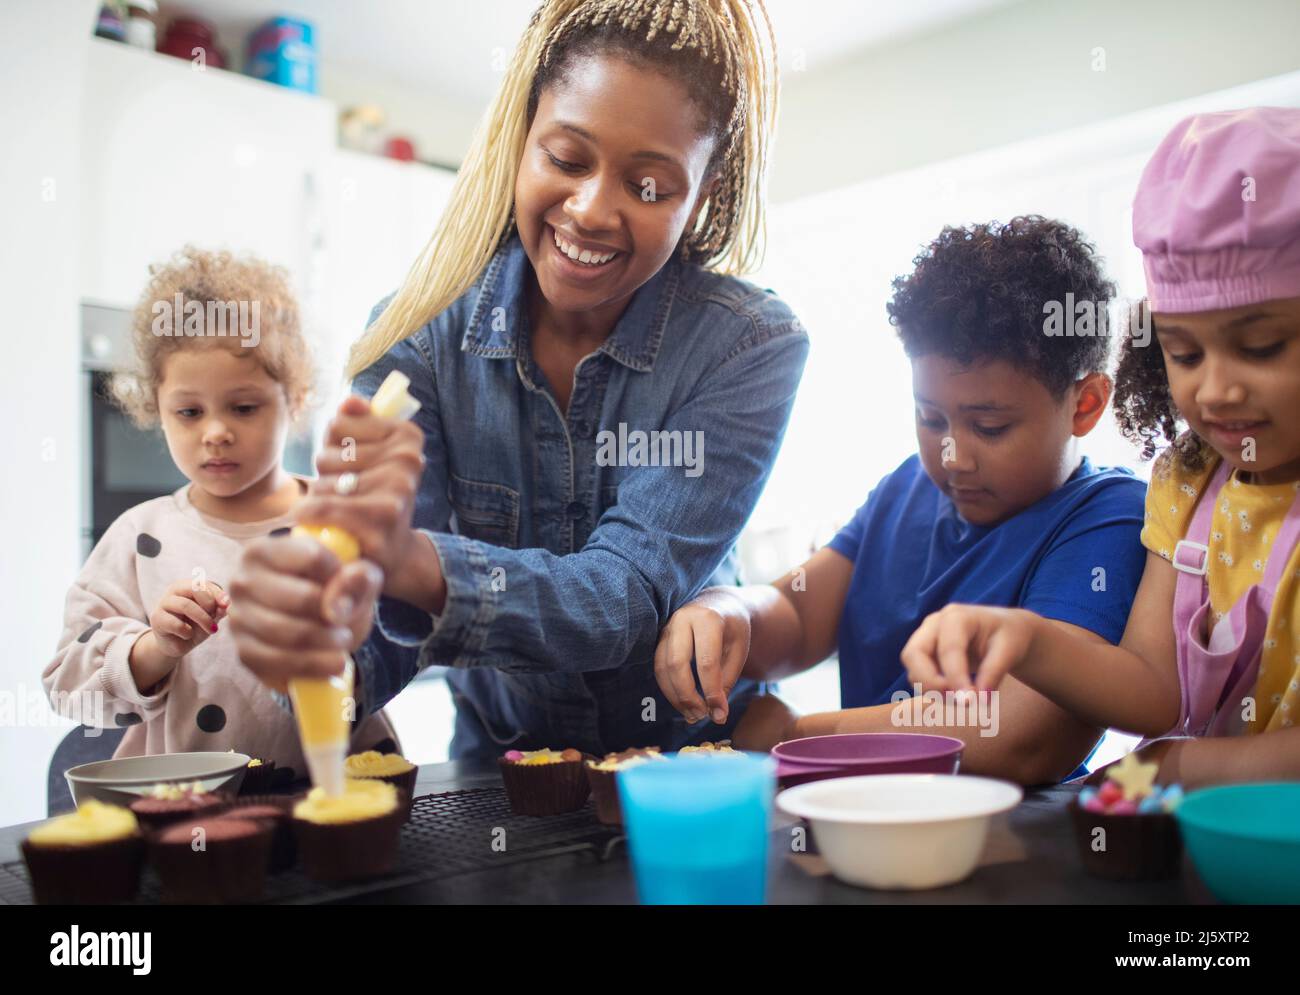 Happy mother and kids decorating cupcakes in kitchen Stock Photo